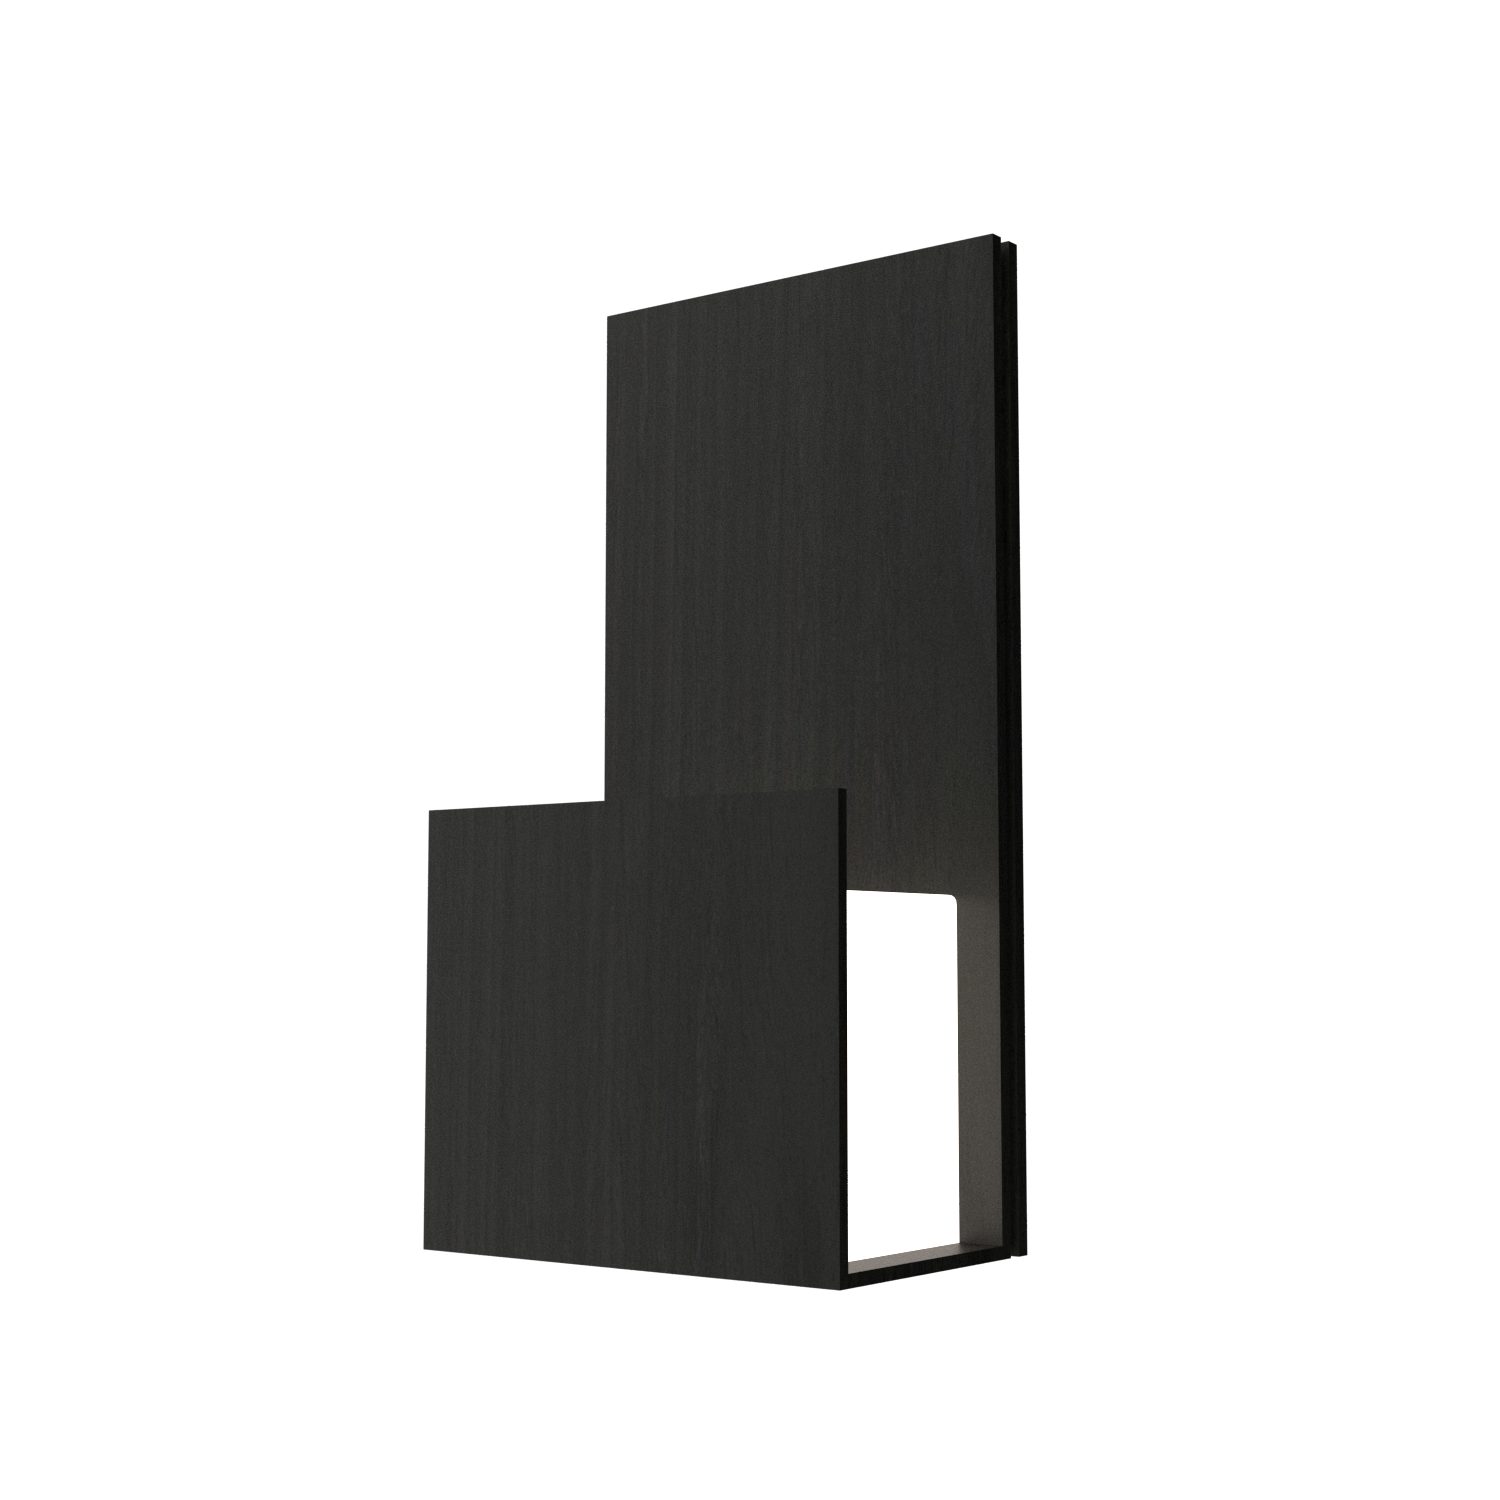 Wall Lamp Accord Clean 4068 - Clean Line Accord Lighting | 44. Charcoal